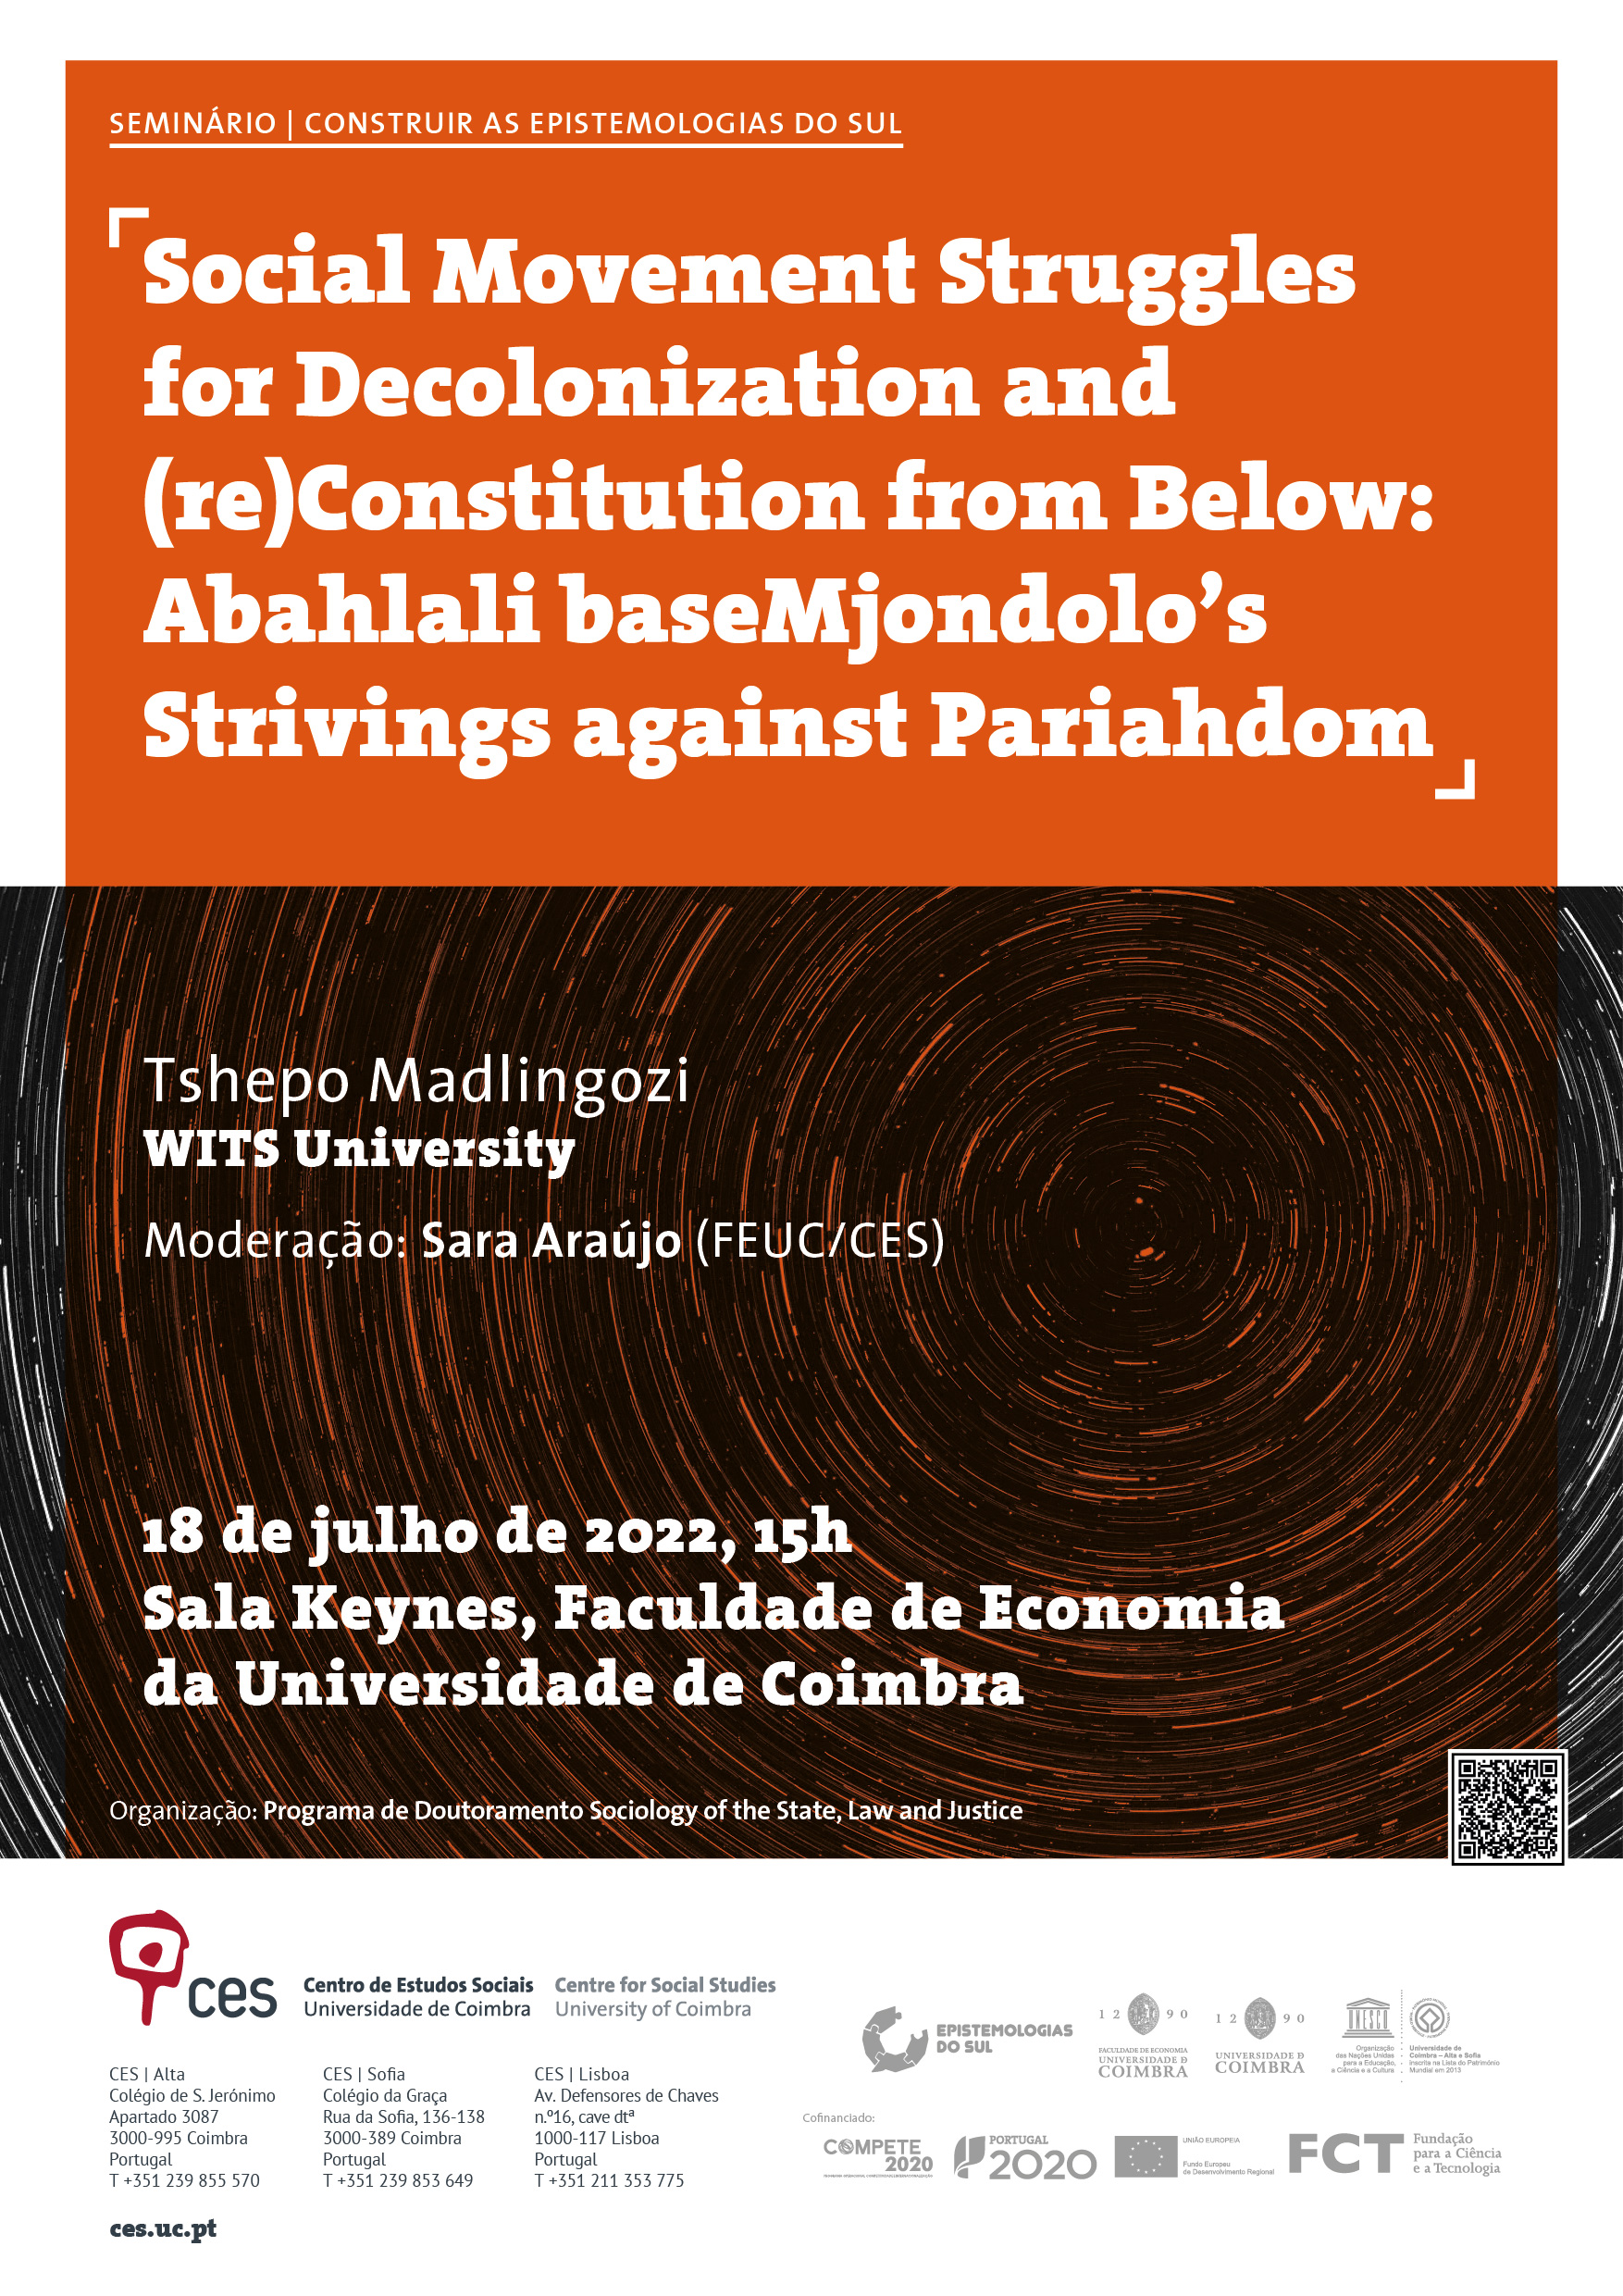 Social Movement Struggles for Decolonization and (re)Constitution from Below: Abahlali baseMjondolo’s Strivings against Pariahdom<span id="edit_38963"><script>$(function() { $('#edit_38963').load( "/myces/user/editobj.php?tipo=evento&id=38963" ); });</script></span>